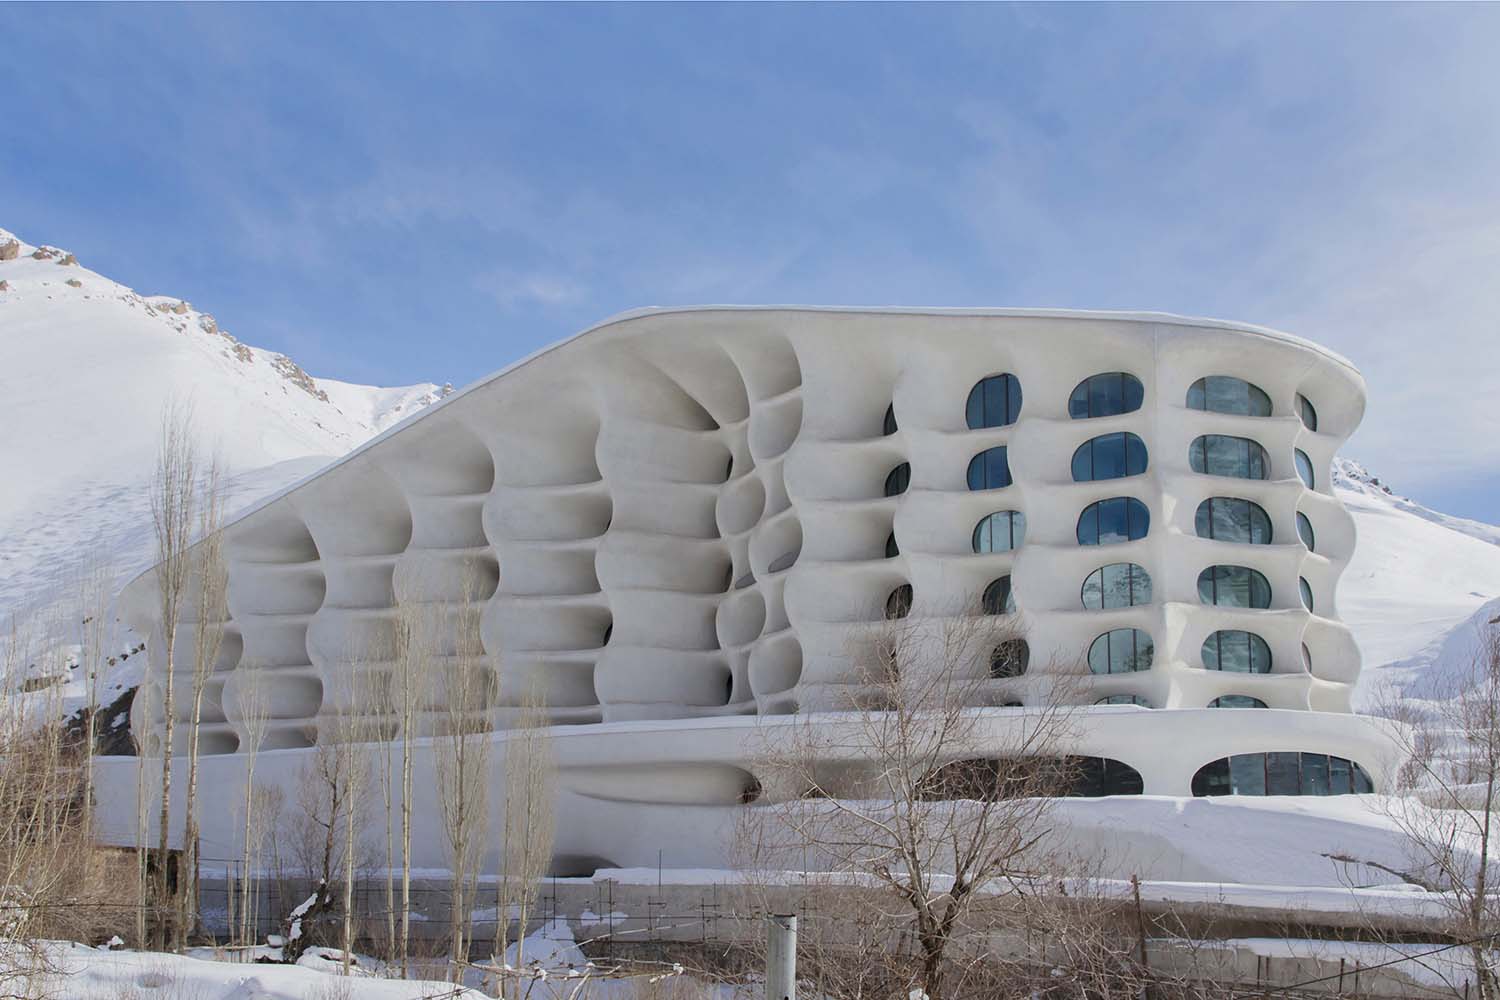 Barin Ski Resort by Ryra Design Studio is Winner in Architecture, Building and Structure Design Category, 2015 - 2016.